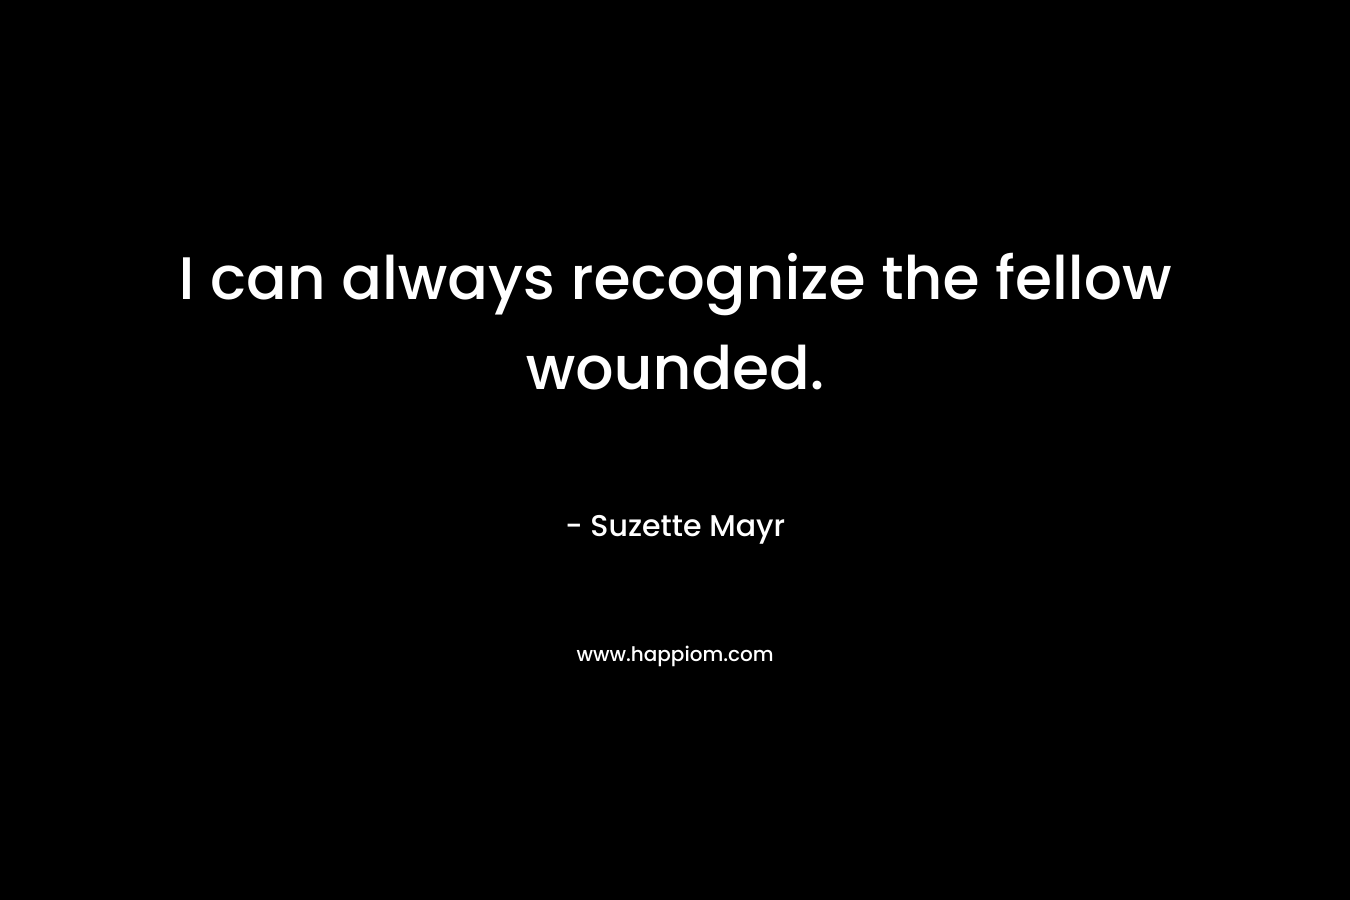 I can always recognize the fellow wounded. – Suzette Mayr